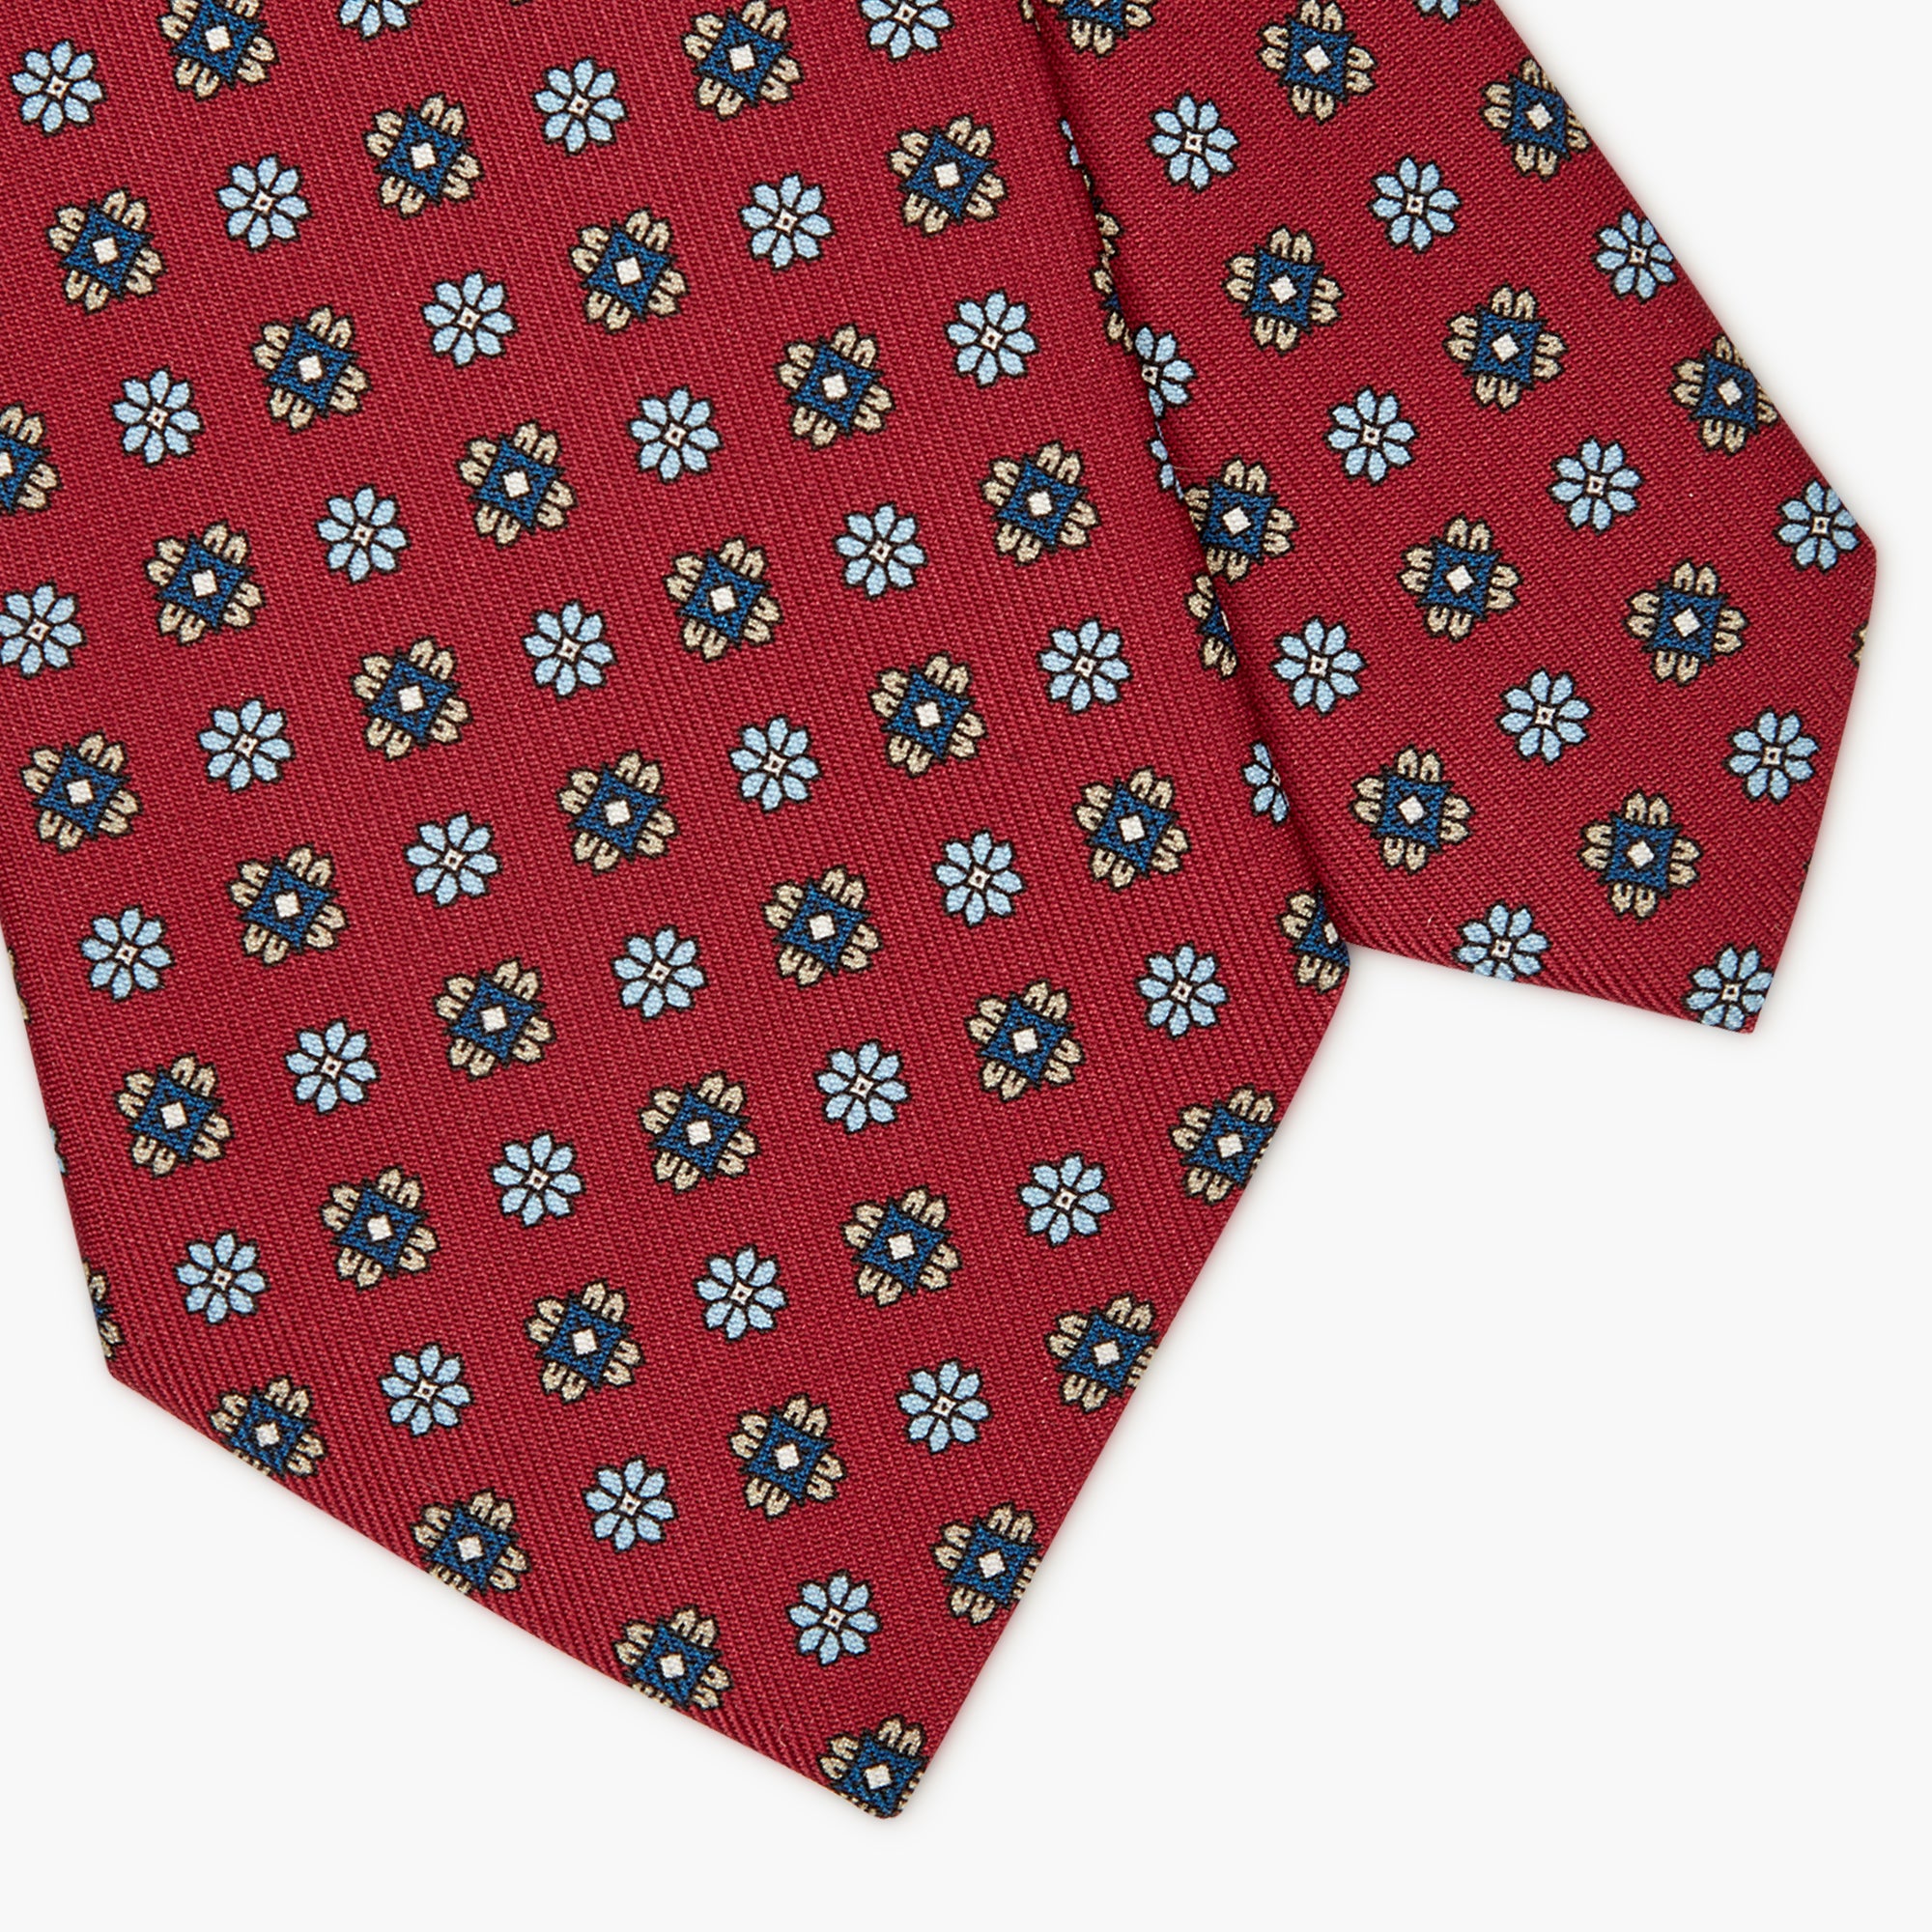 3-Fold Floral Printed English Silk Tie - Grape Red